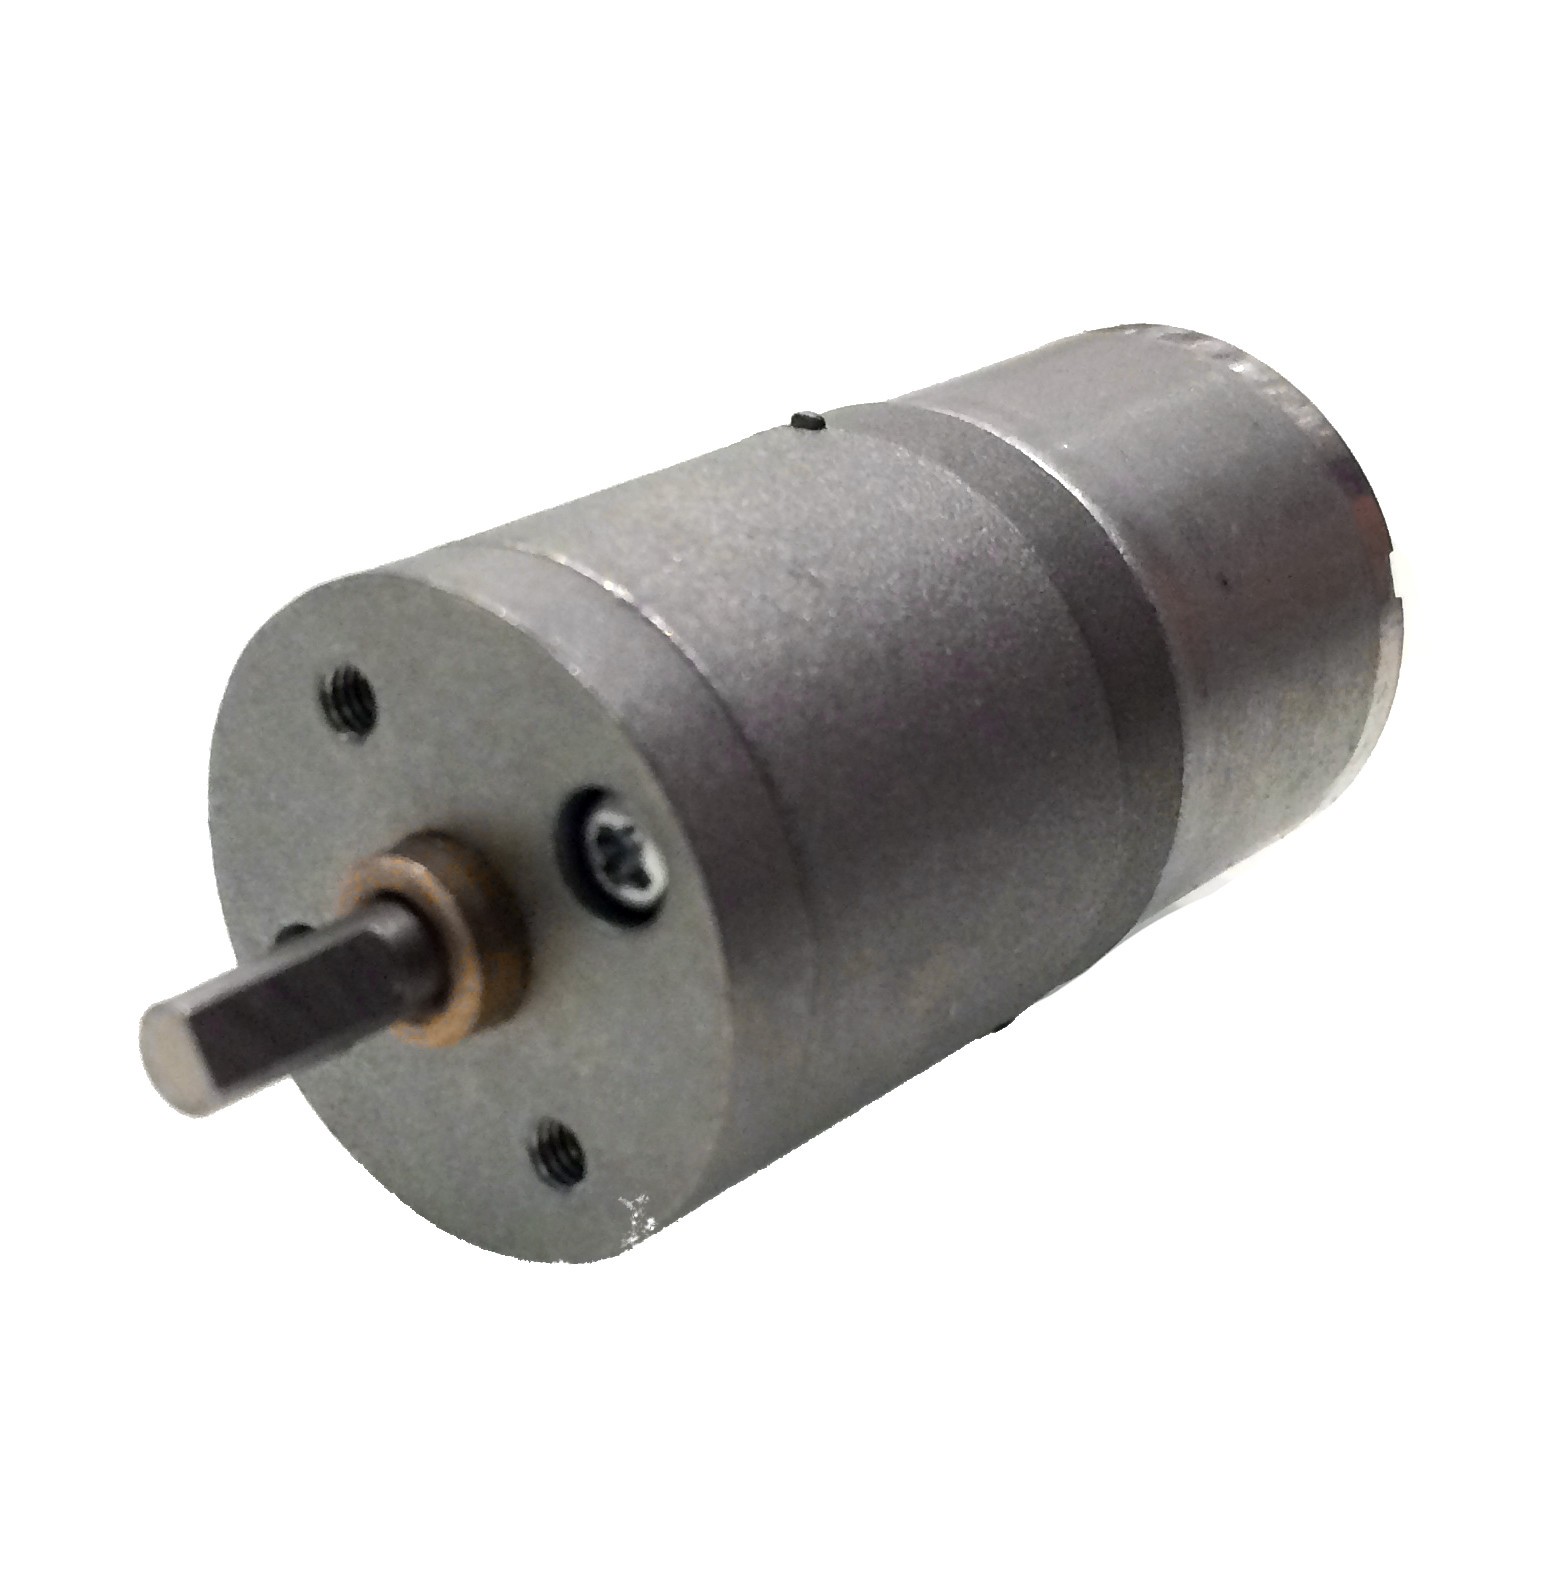 12Vdc Works as low as 3Vdc xyz 12v Gear Motor 520RPM approx. 100 RPM 